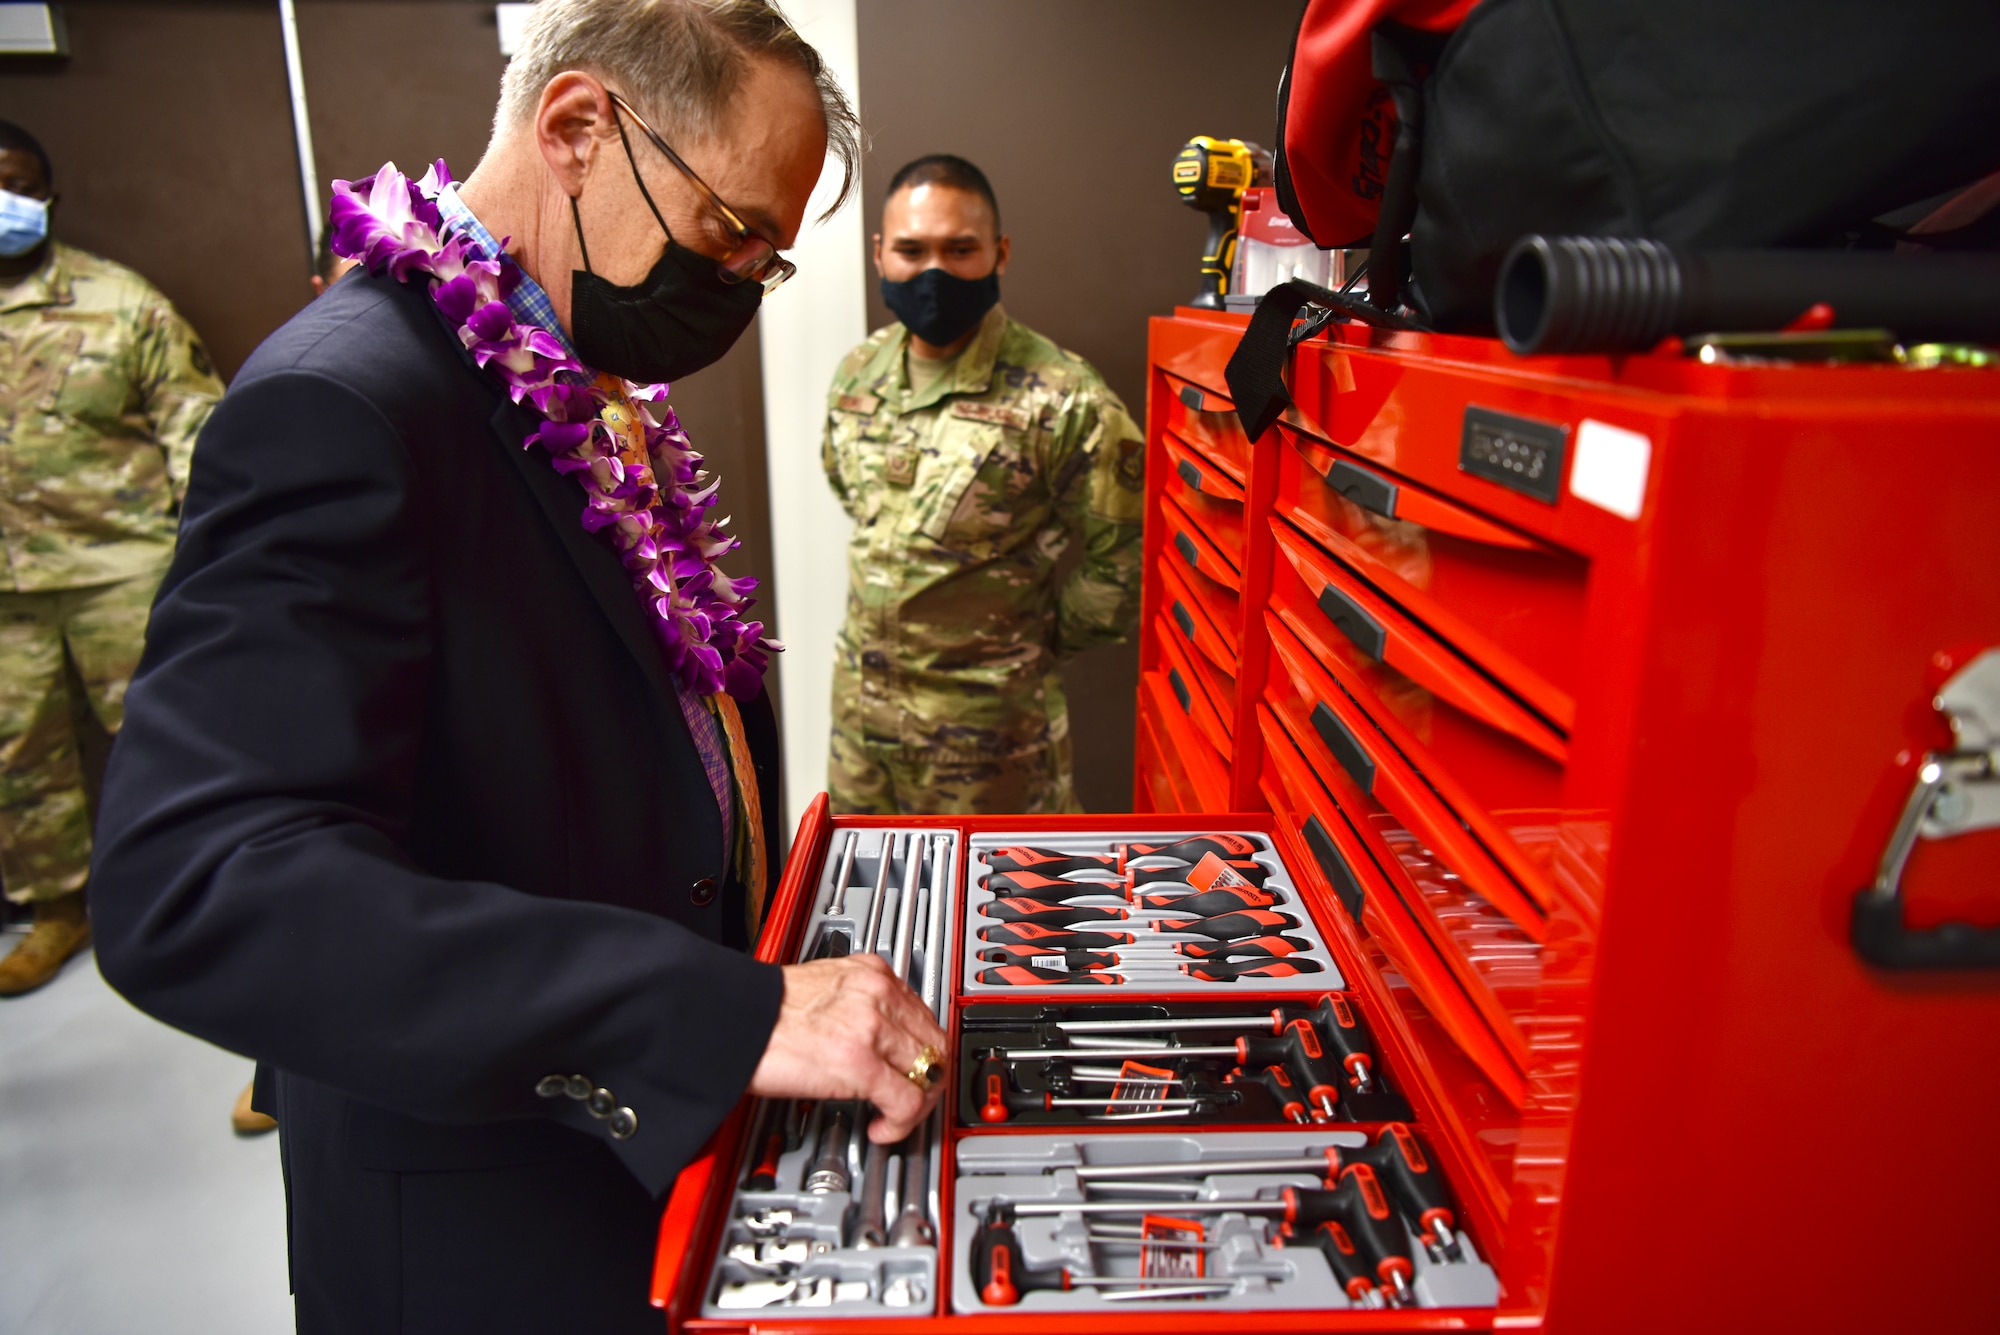 Dr. Brian Lein, Defense Health Agency assistant director, examines tools utilized by the Biomedical Equipment Technician shop at Joint Base Pearl Harbor-Hickam, Hawaii, Oct. 19, 2021. The BMET shop provides both in-clinic service, and a workshop to service equipment that is used by the 15th Medical Group. (U.S. Air Force photo by 1st Lt. Benjamin Aronson)